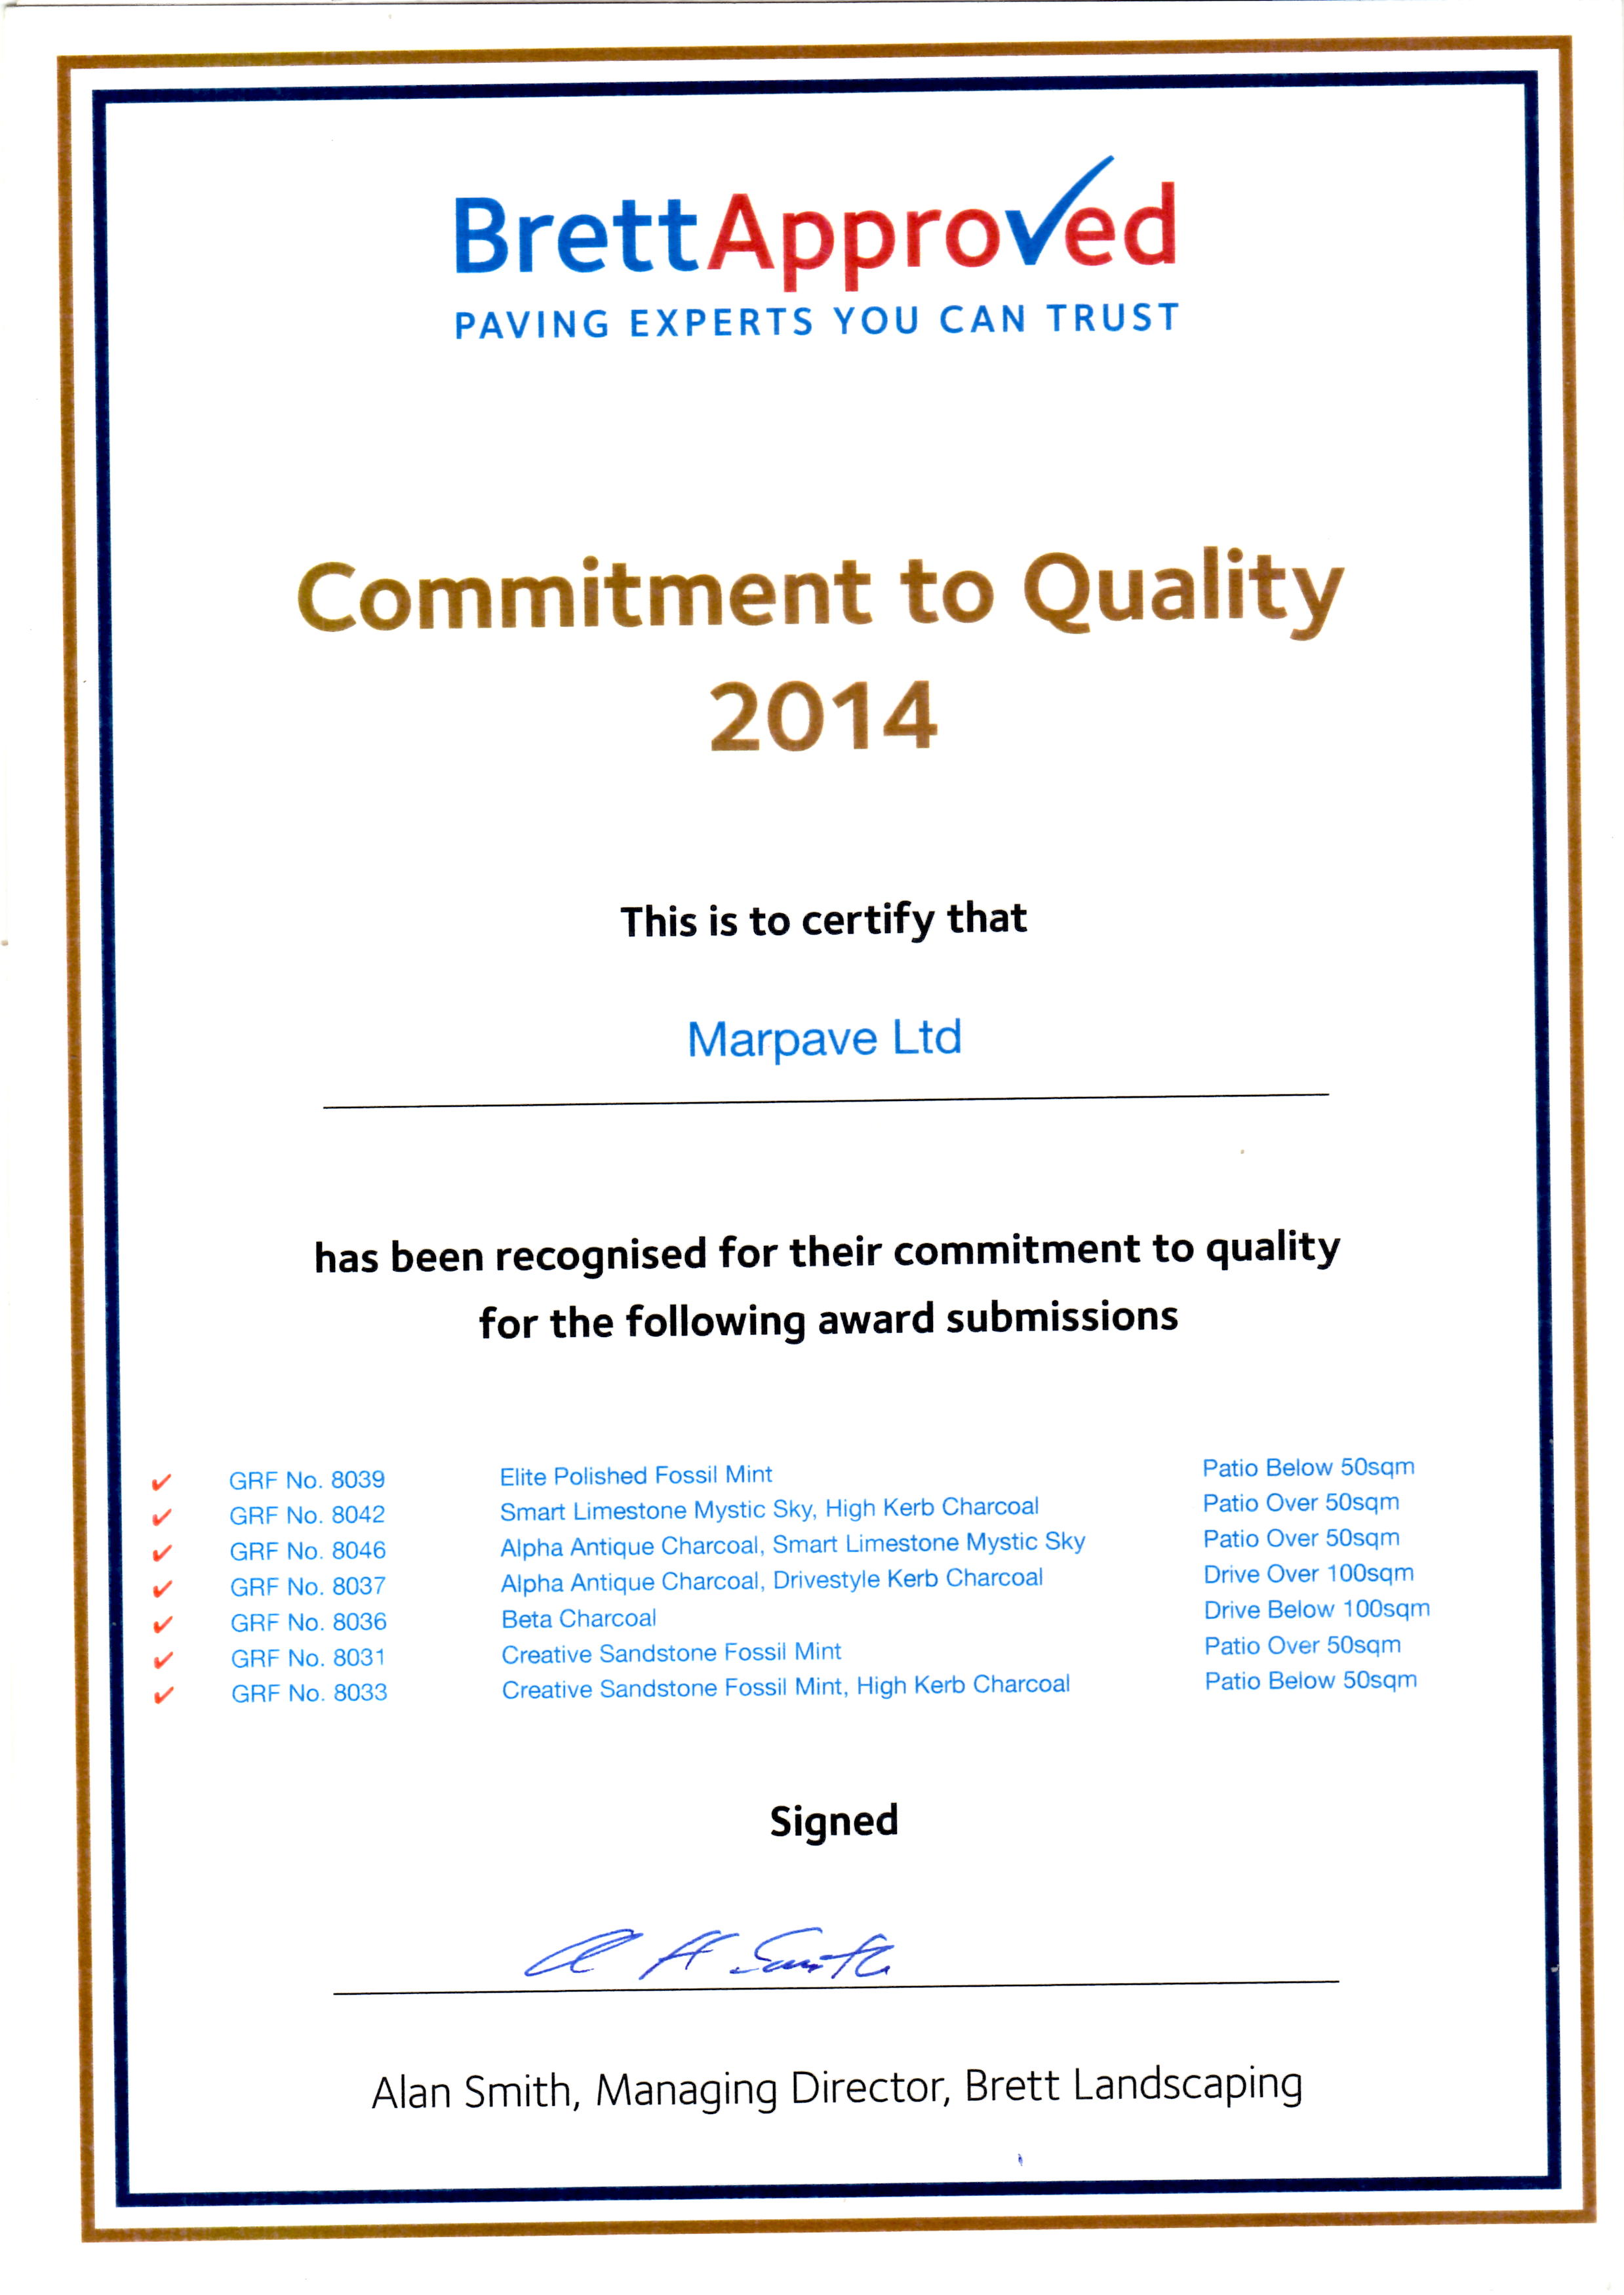 Continued Commitment to Quality 2014